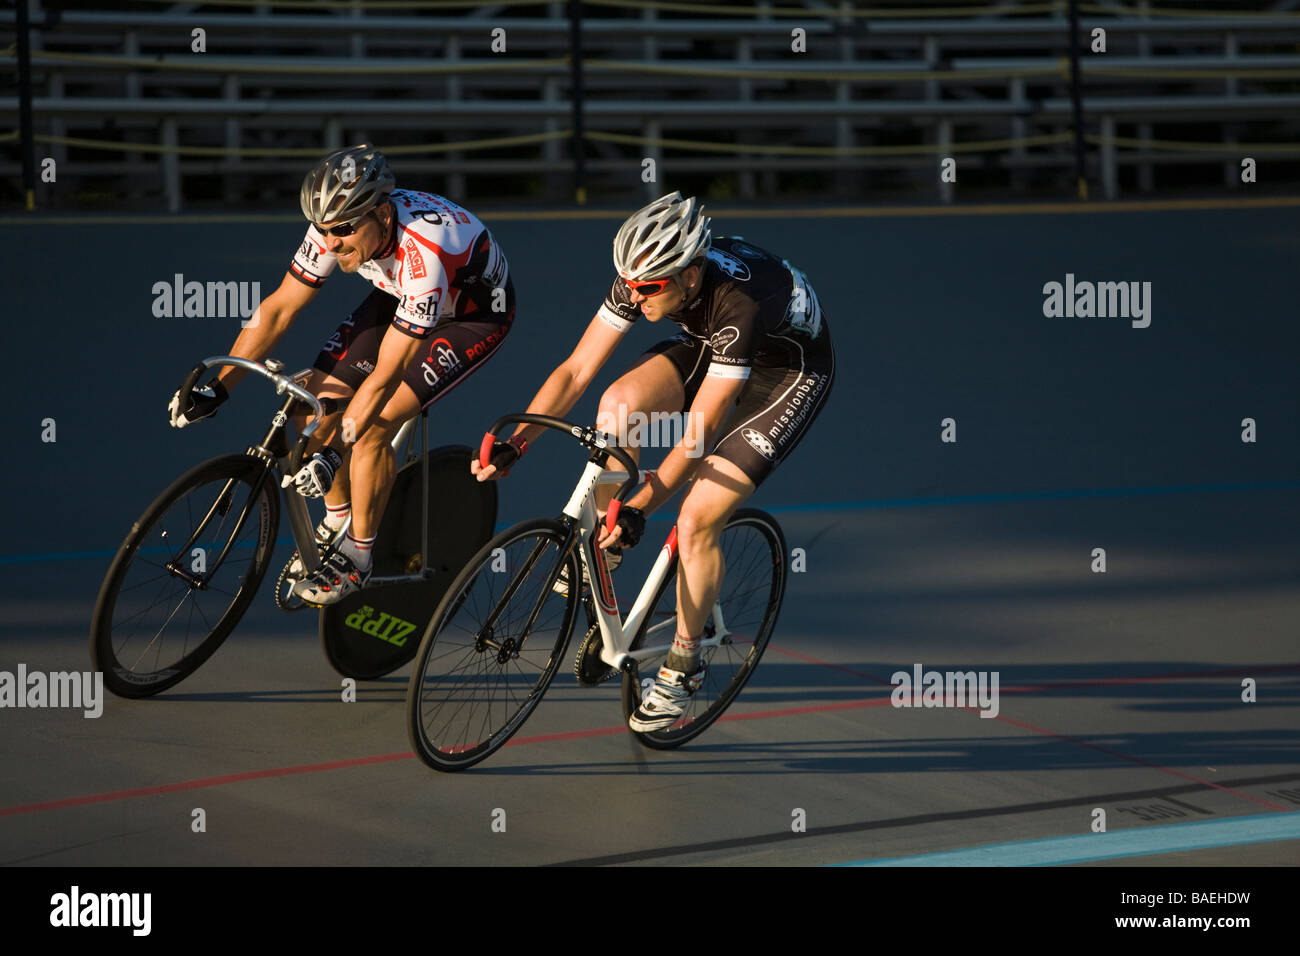 ILLINOIS Northbrook Two adult male cyclists sprint during bicycle race at velodrome track Stock Photo